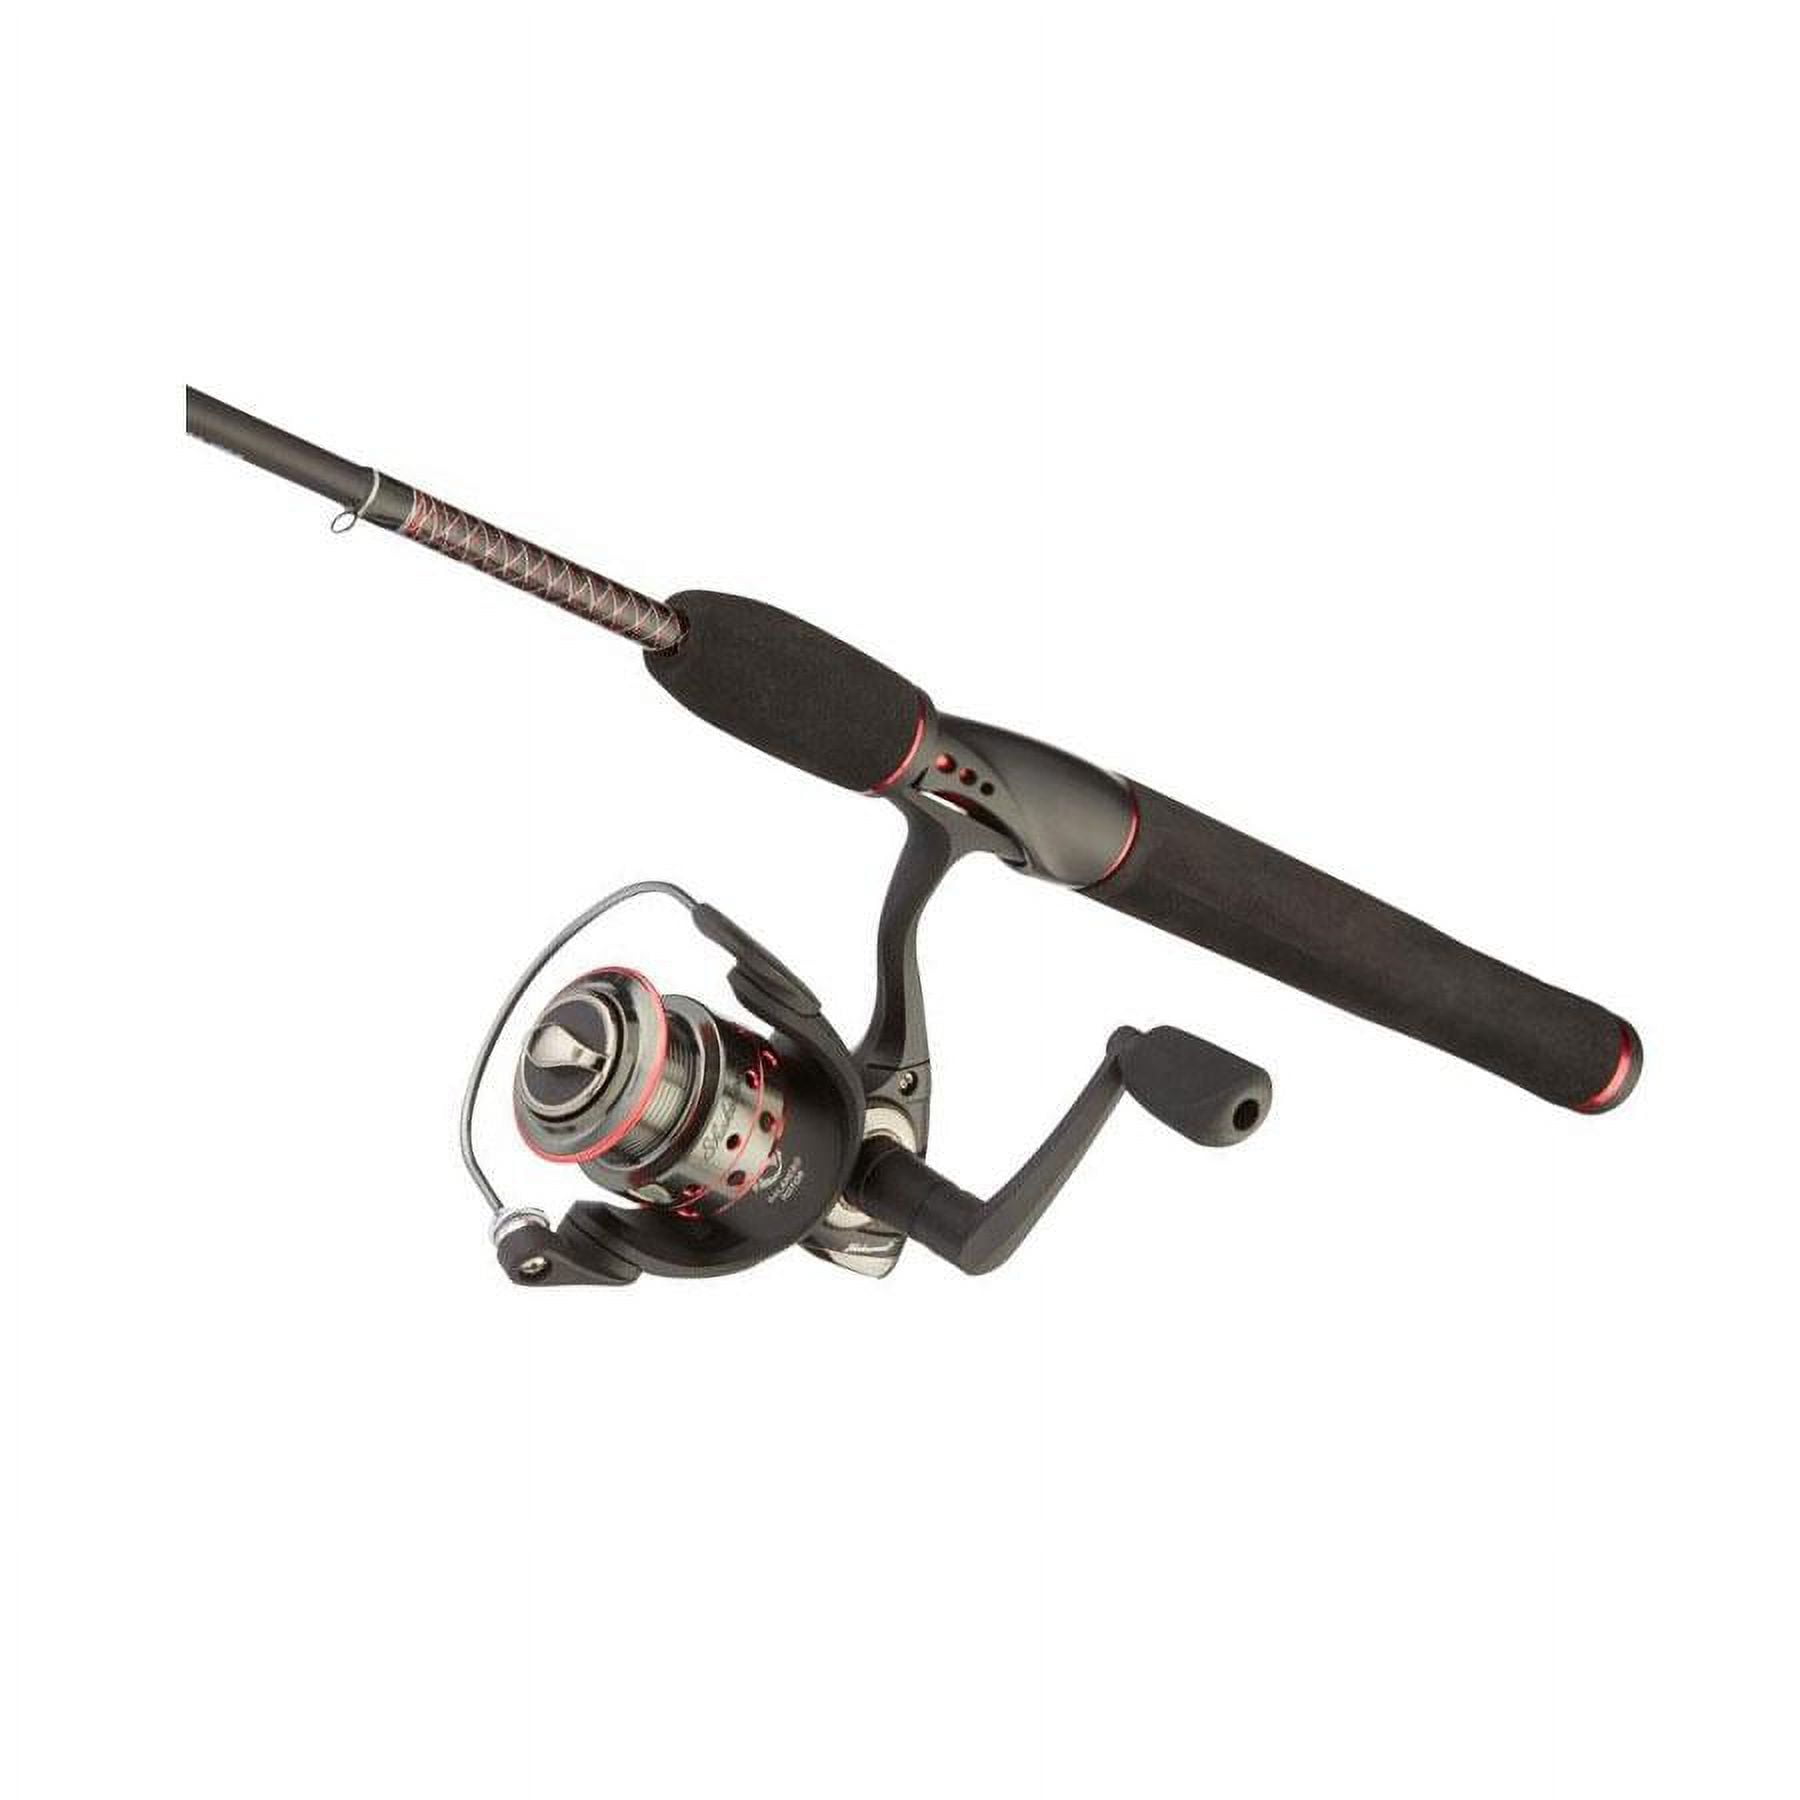 Ugly Stik 5' GX2 Spinning Fishing Rod and Reel Spinning Combo